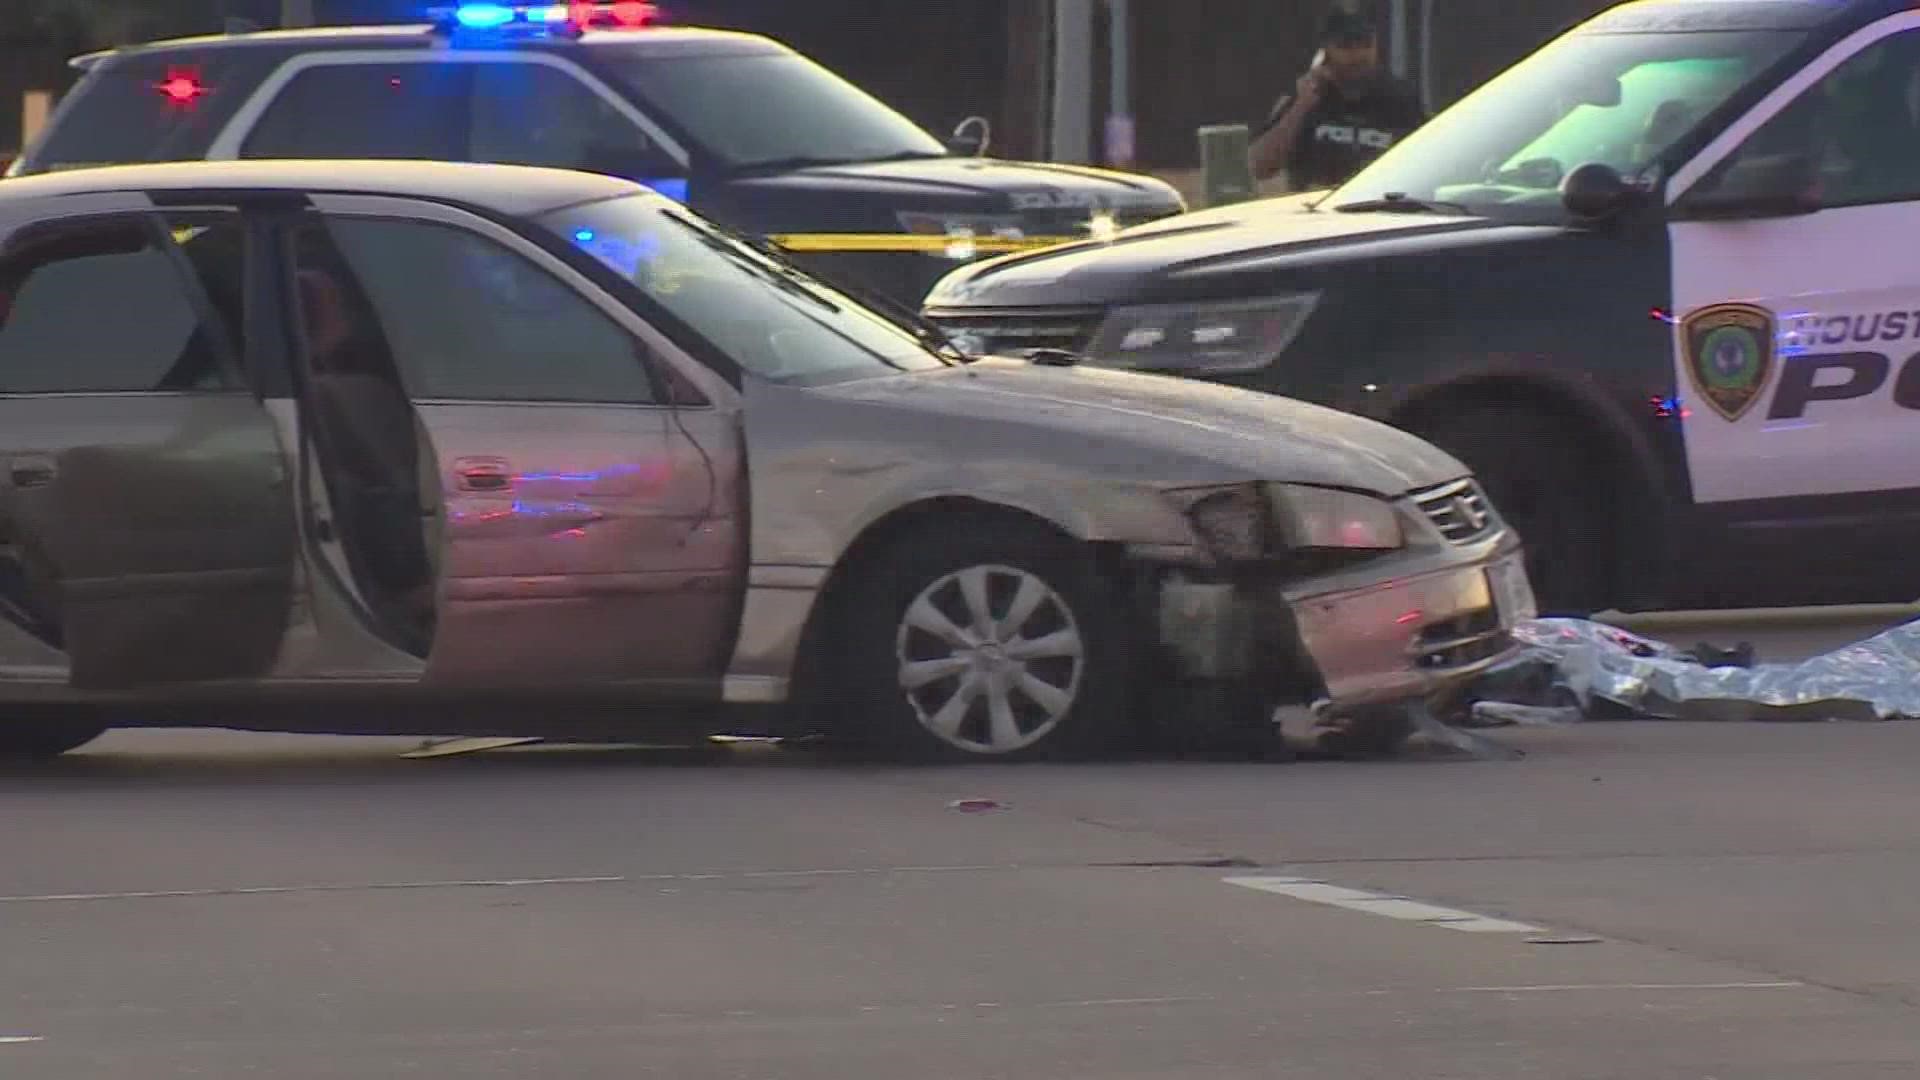 A police chase in west Houston ended Sunday evening after a suspect was shot, police say.